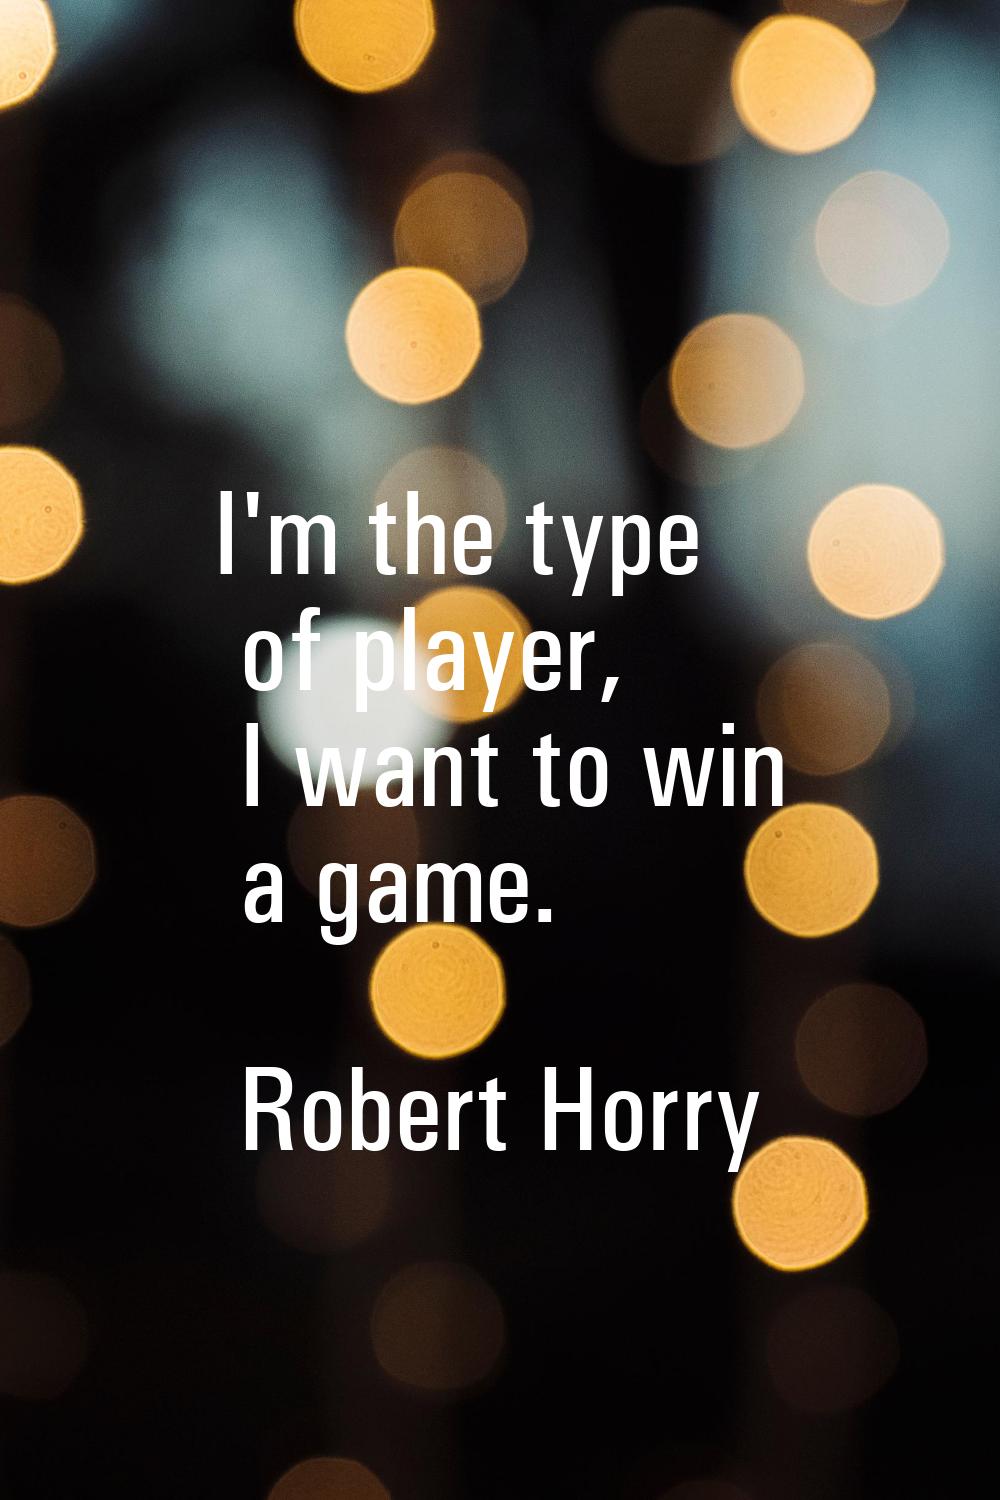 I'm the type of player, I want to win a game.